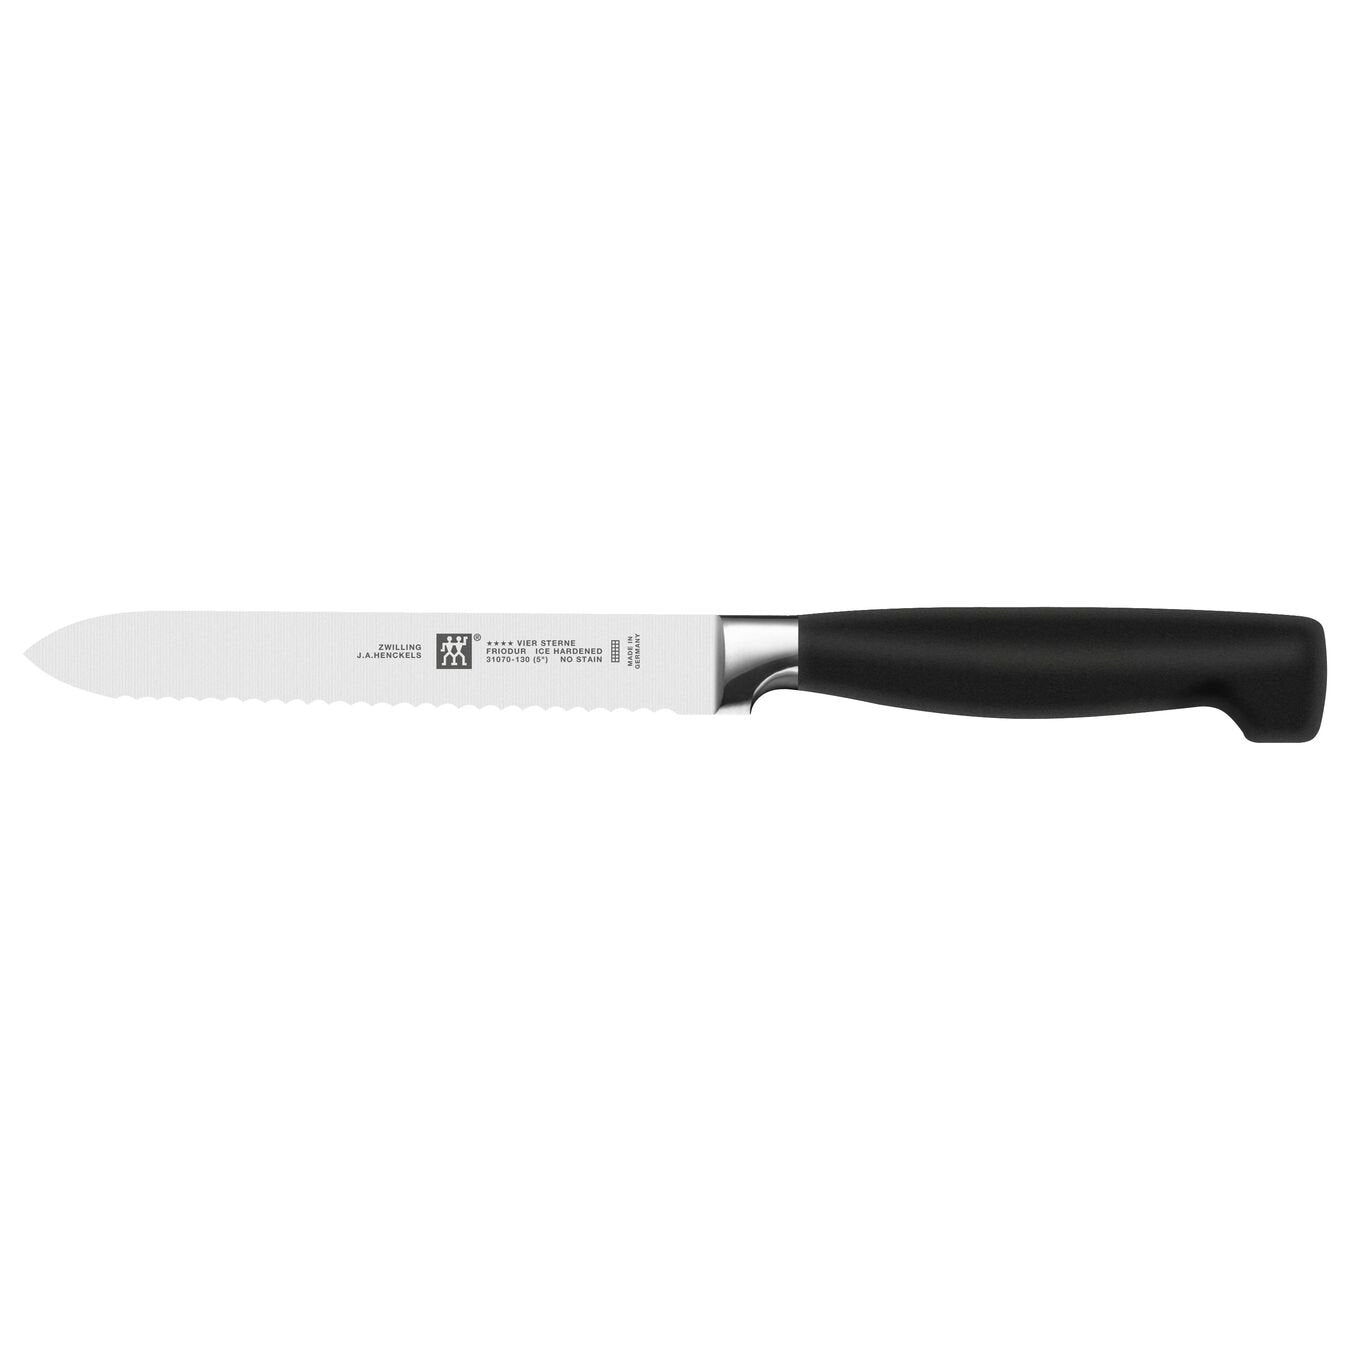 serrated knife with black handle on white back ground